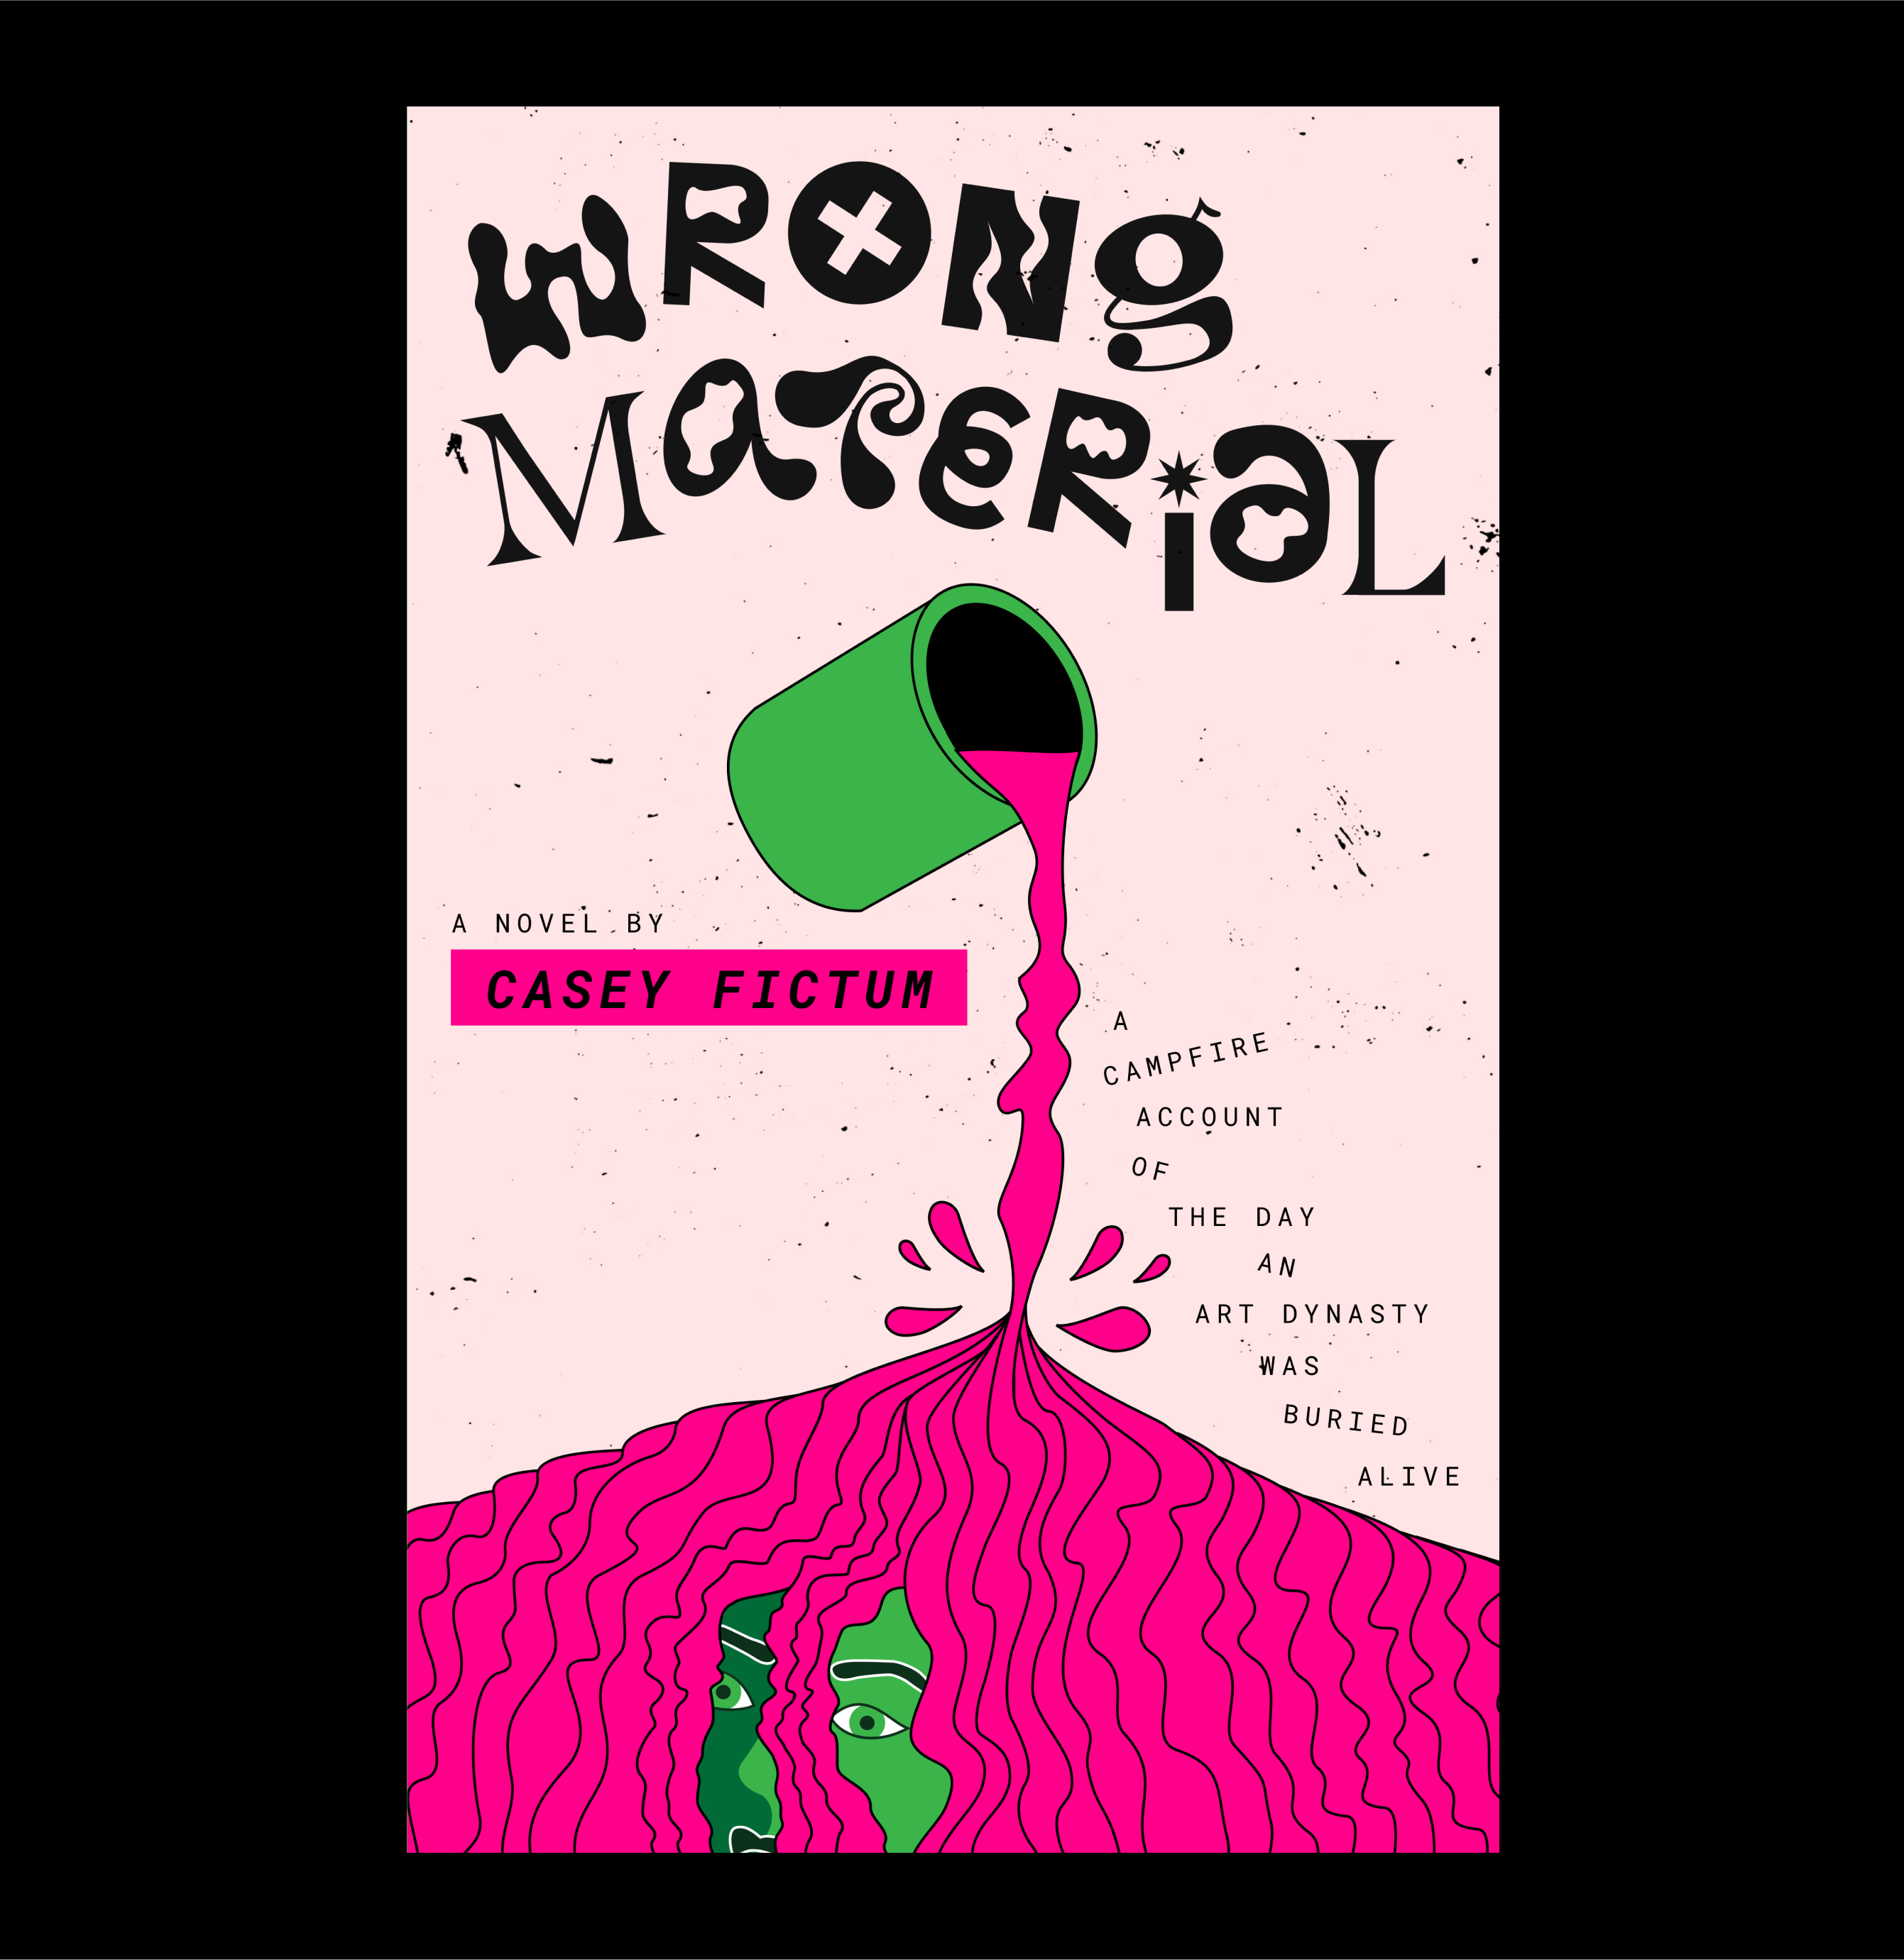 The book cover design of the novel Wrong Material, by Casey Fictum